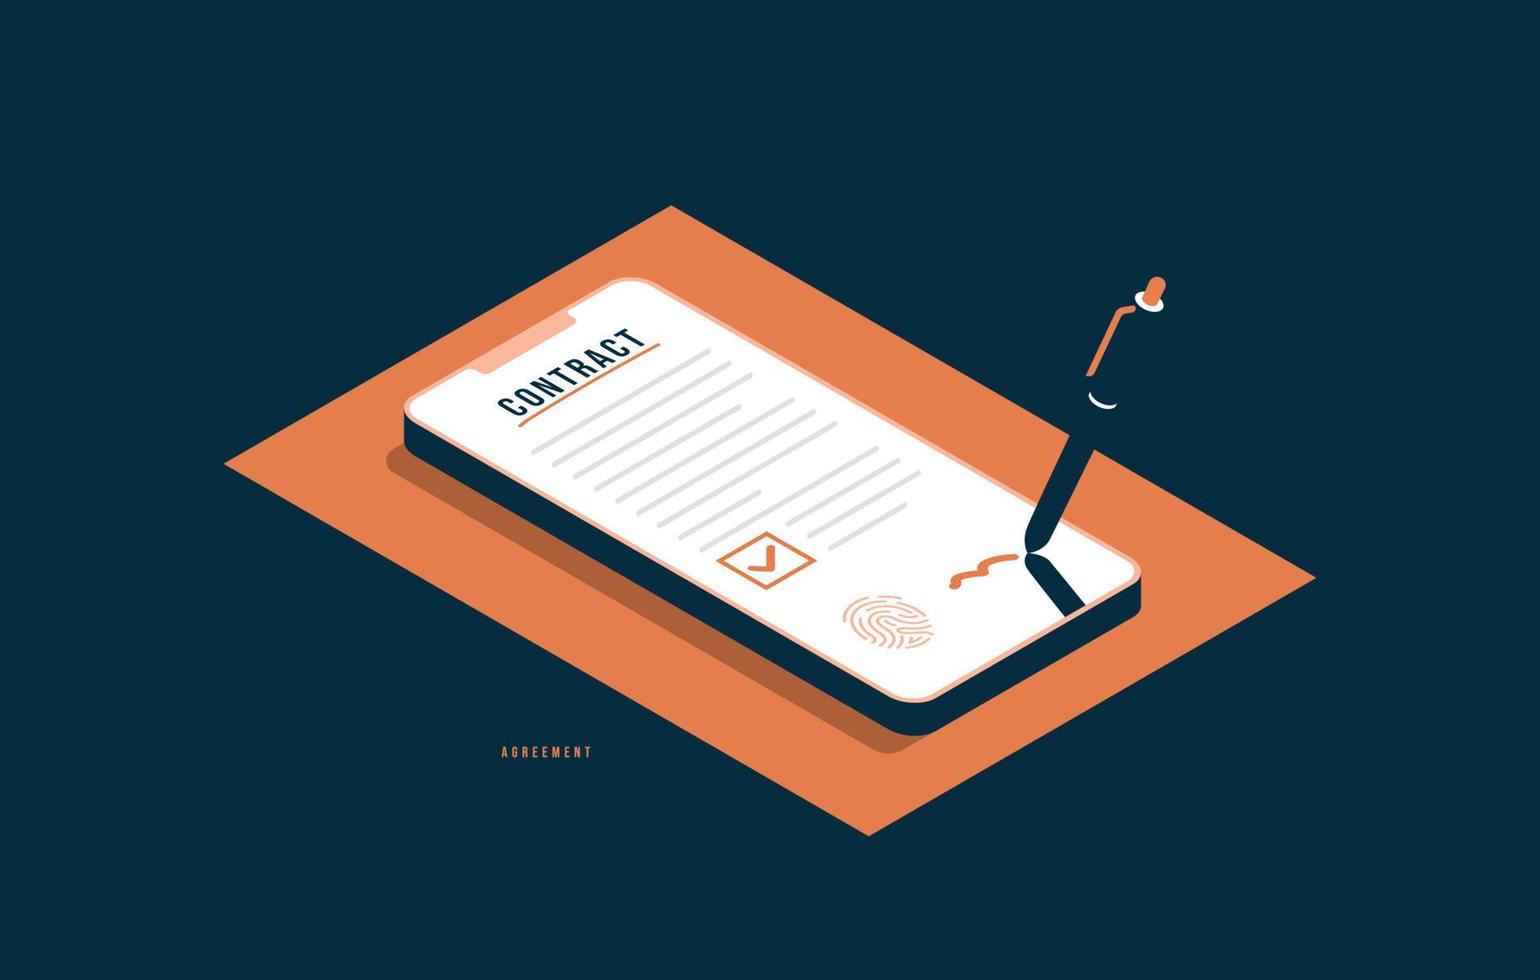 Digital signature and smart contract agreement concept, Isometric smartphone with pencil signing document. Successful completion of business tasks vector illustration